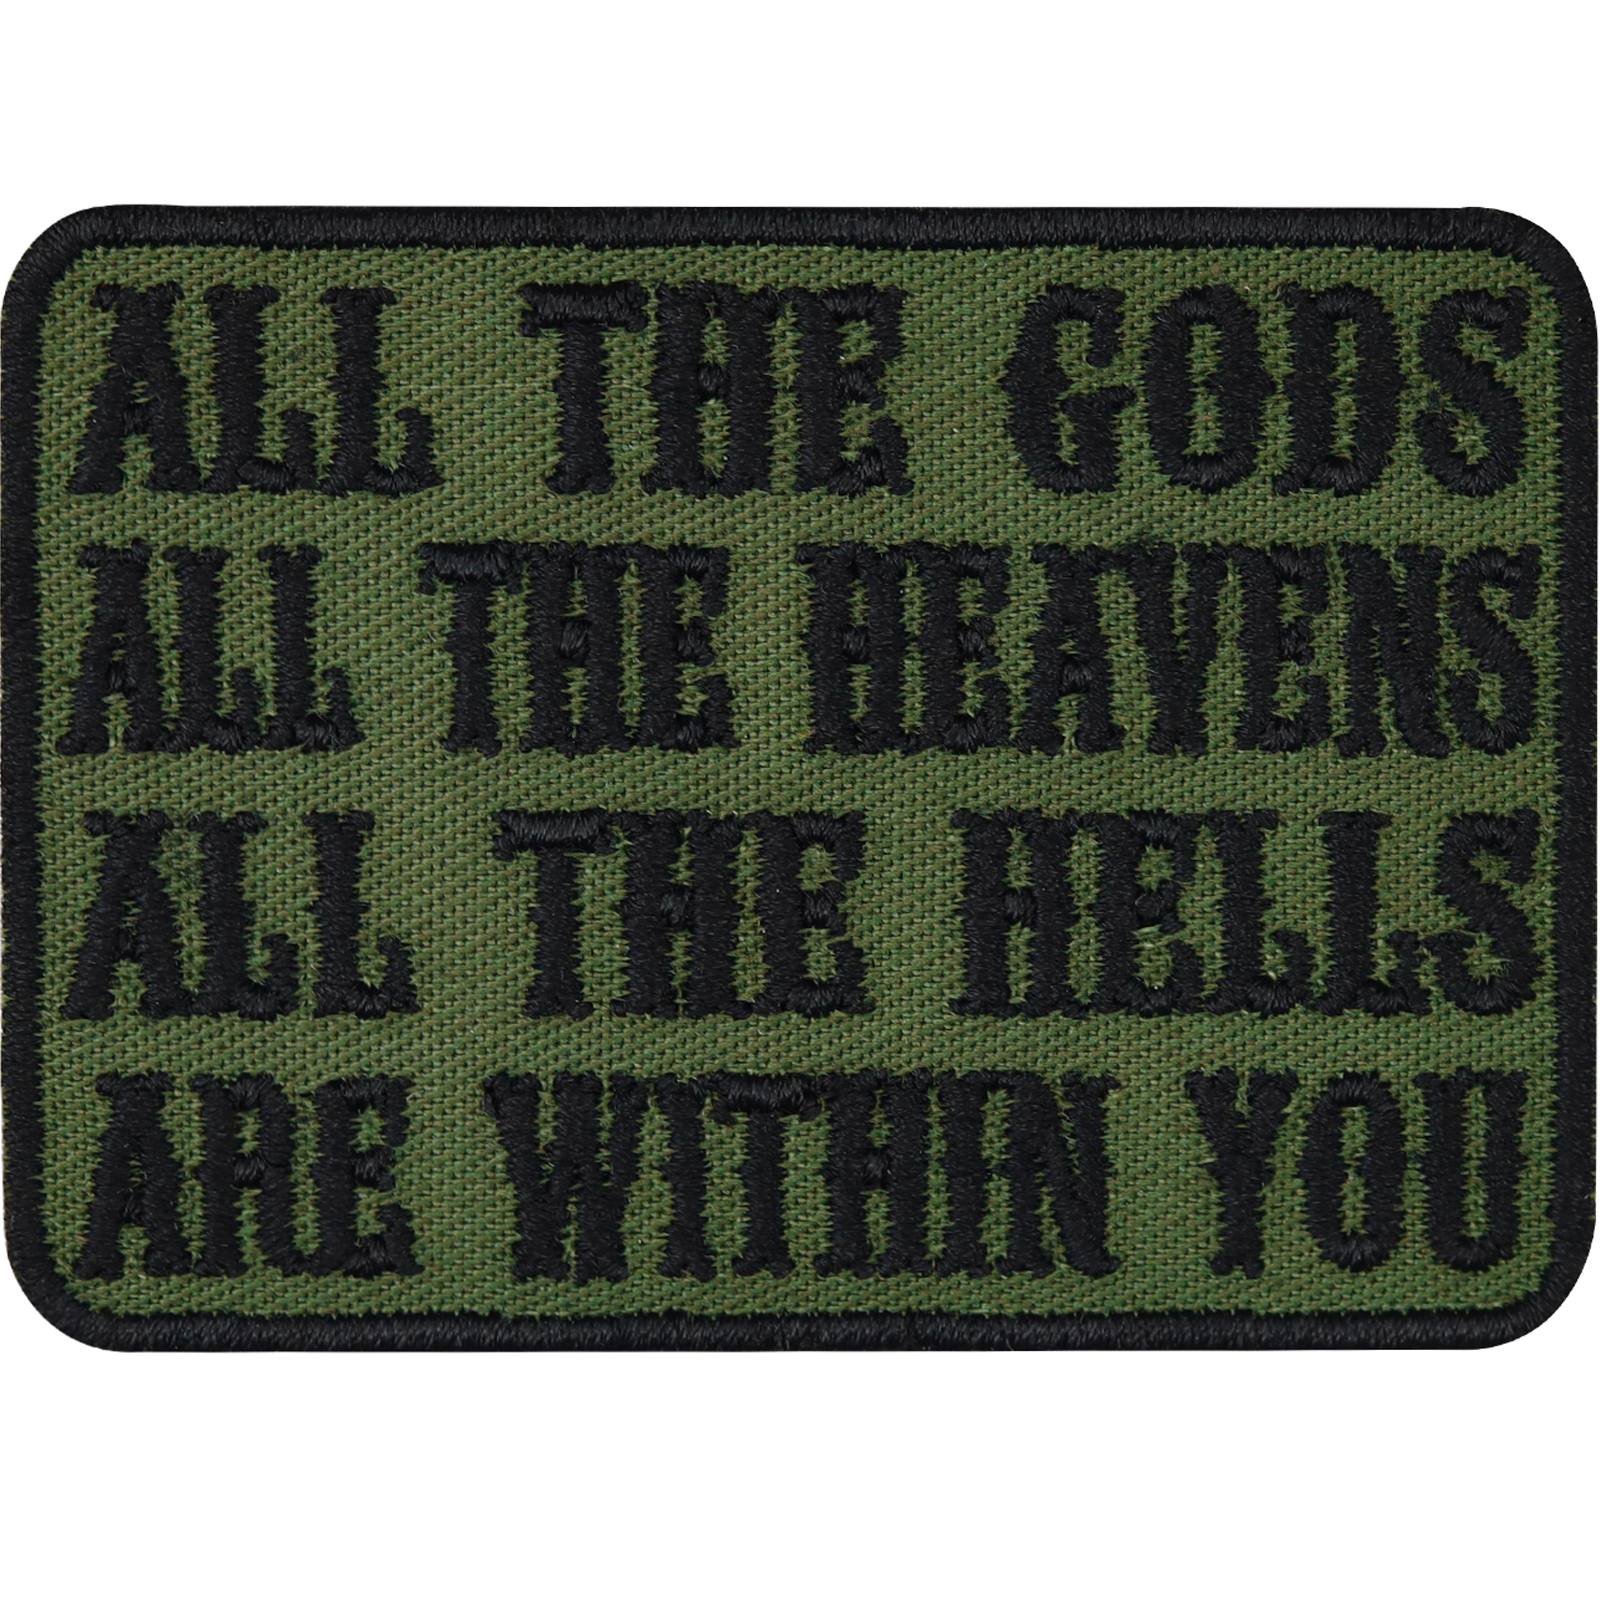 All the gods, all the heavens, all the hells are within you - Patch